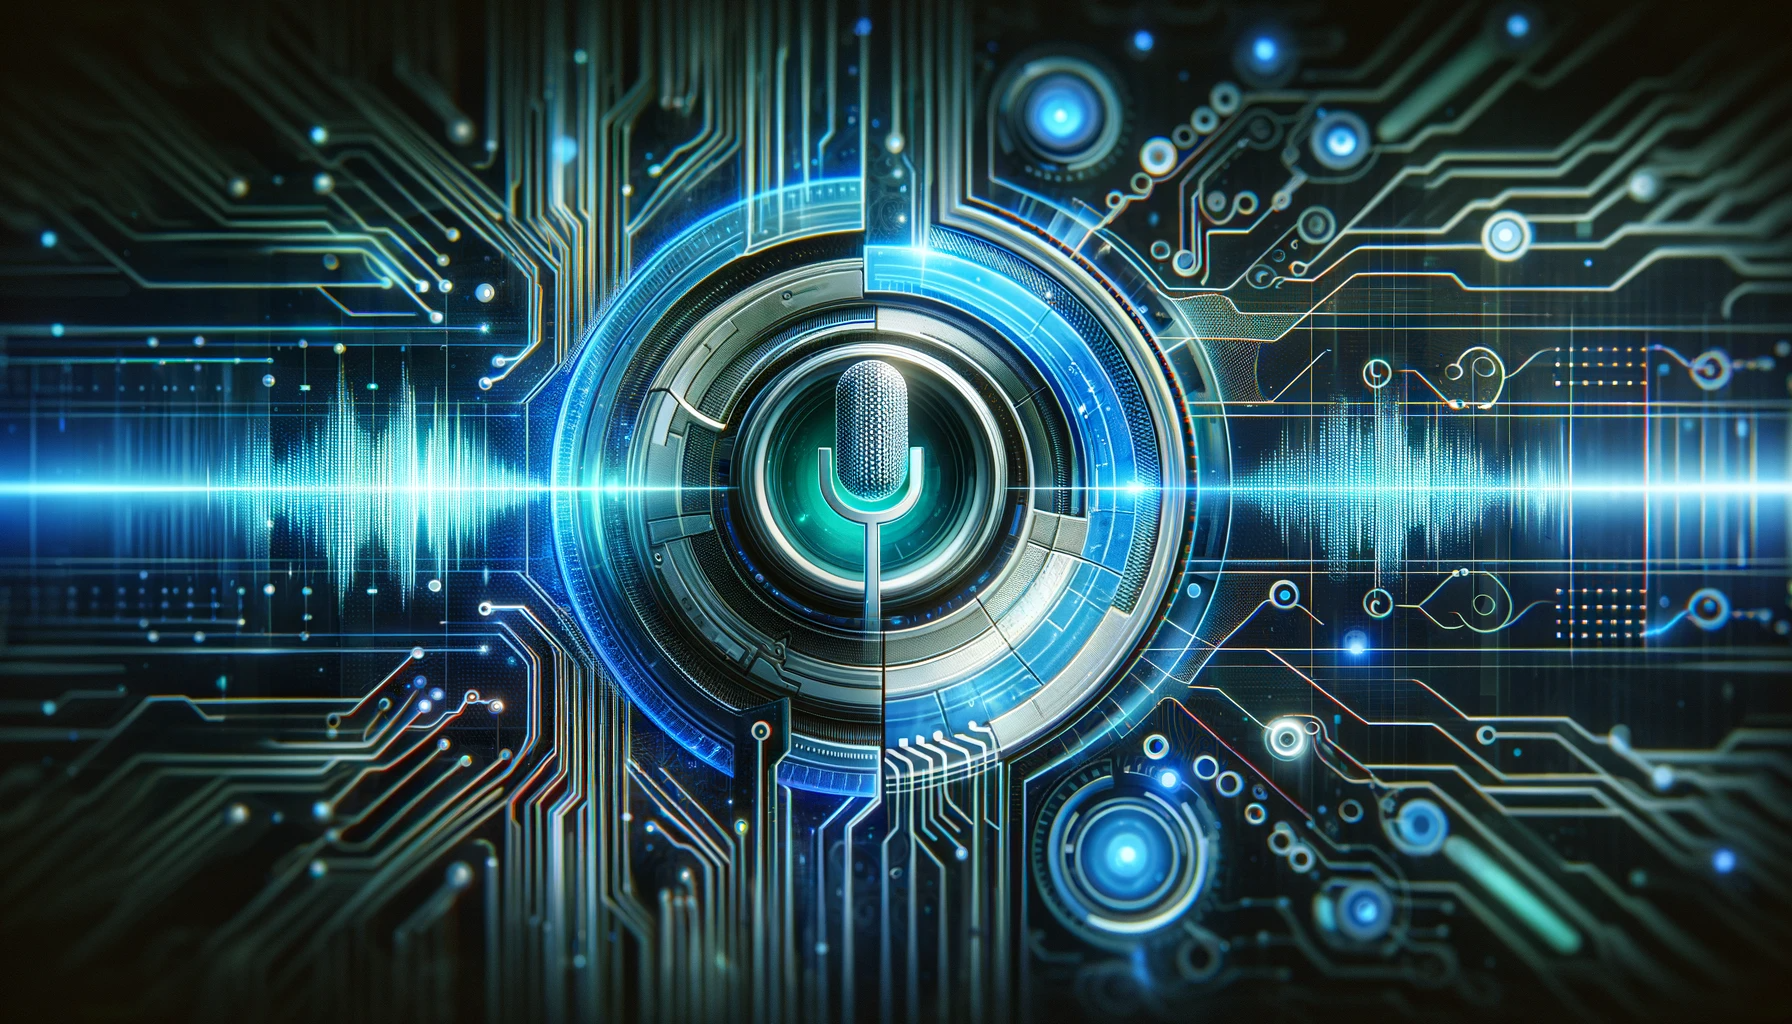 Futuristic digital artwork emphasizing the theme of voice search and AI. The image features a stylized representation of a voice waveform or sound waves intertwined with digital elements symbolizing AI, such as circuit patterns and binary code. The background is sleek and modern, infused with tech-inspired colors like blues, greens, and metallic tones, and includes subtle hints of SEO imagery like search bars and magnifying glasses.